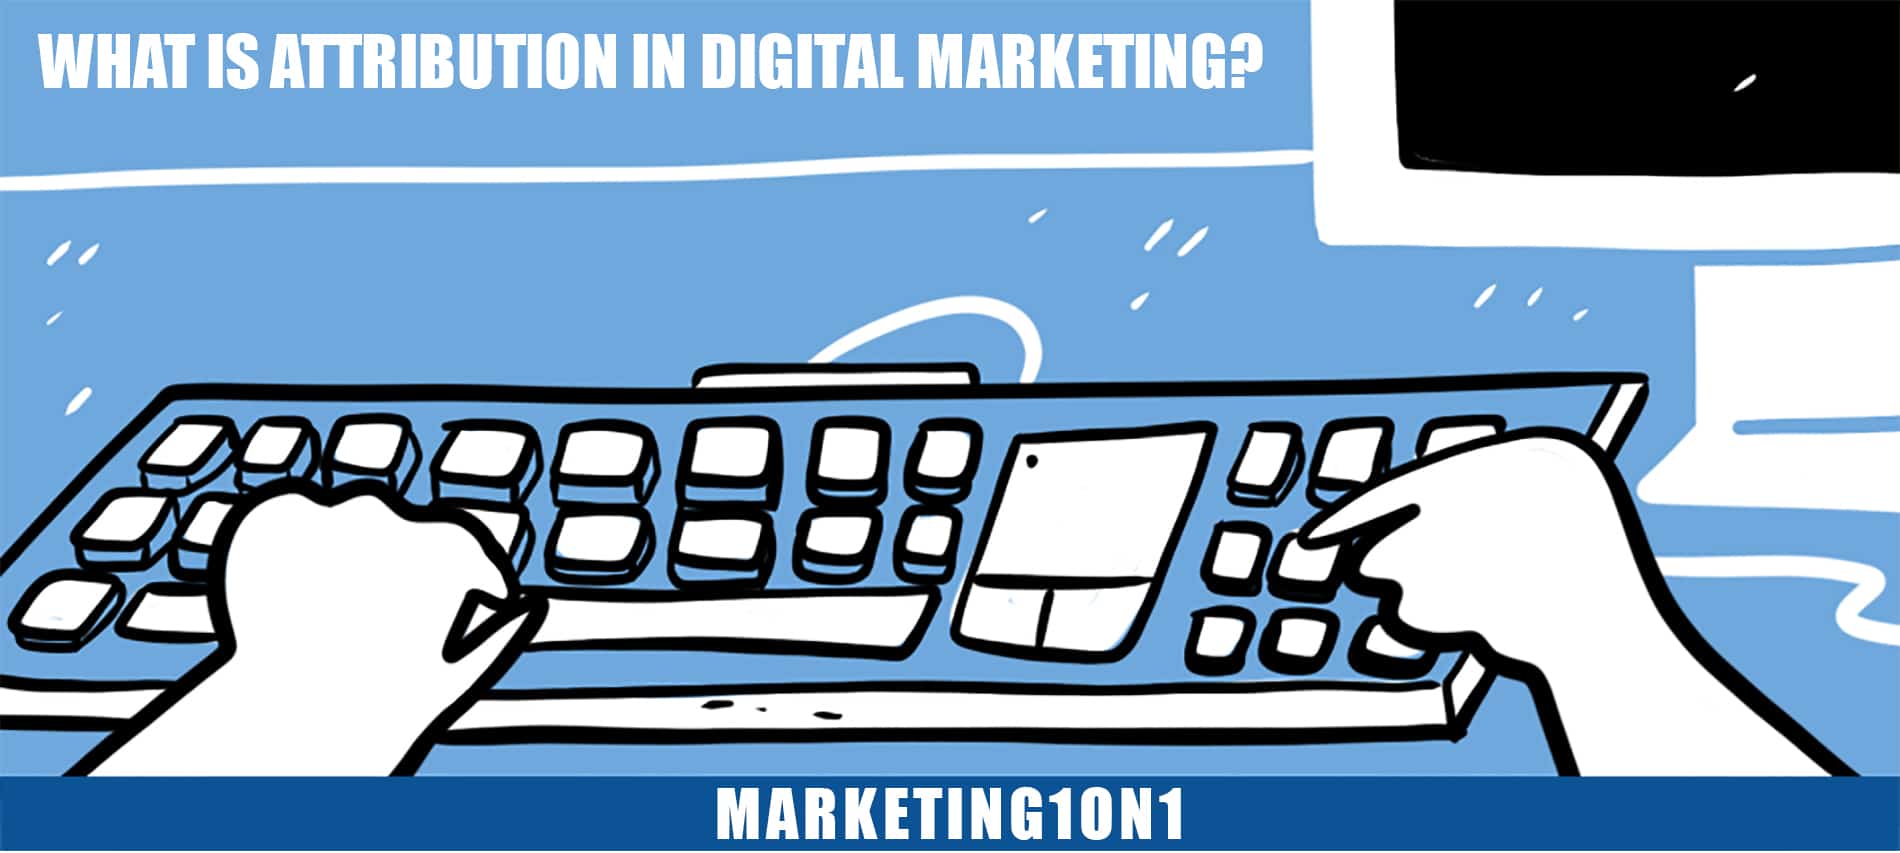 What is attribution in digital marketing?